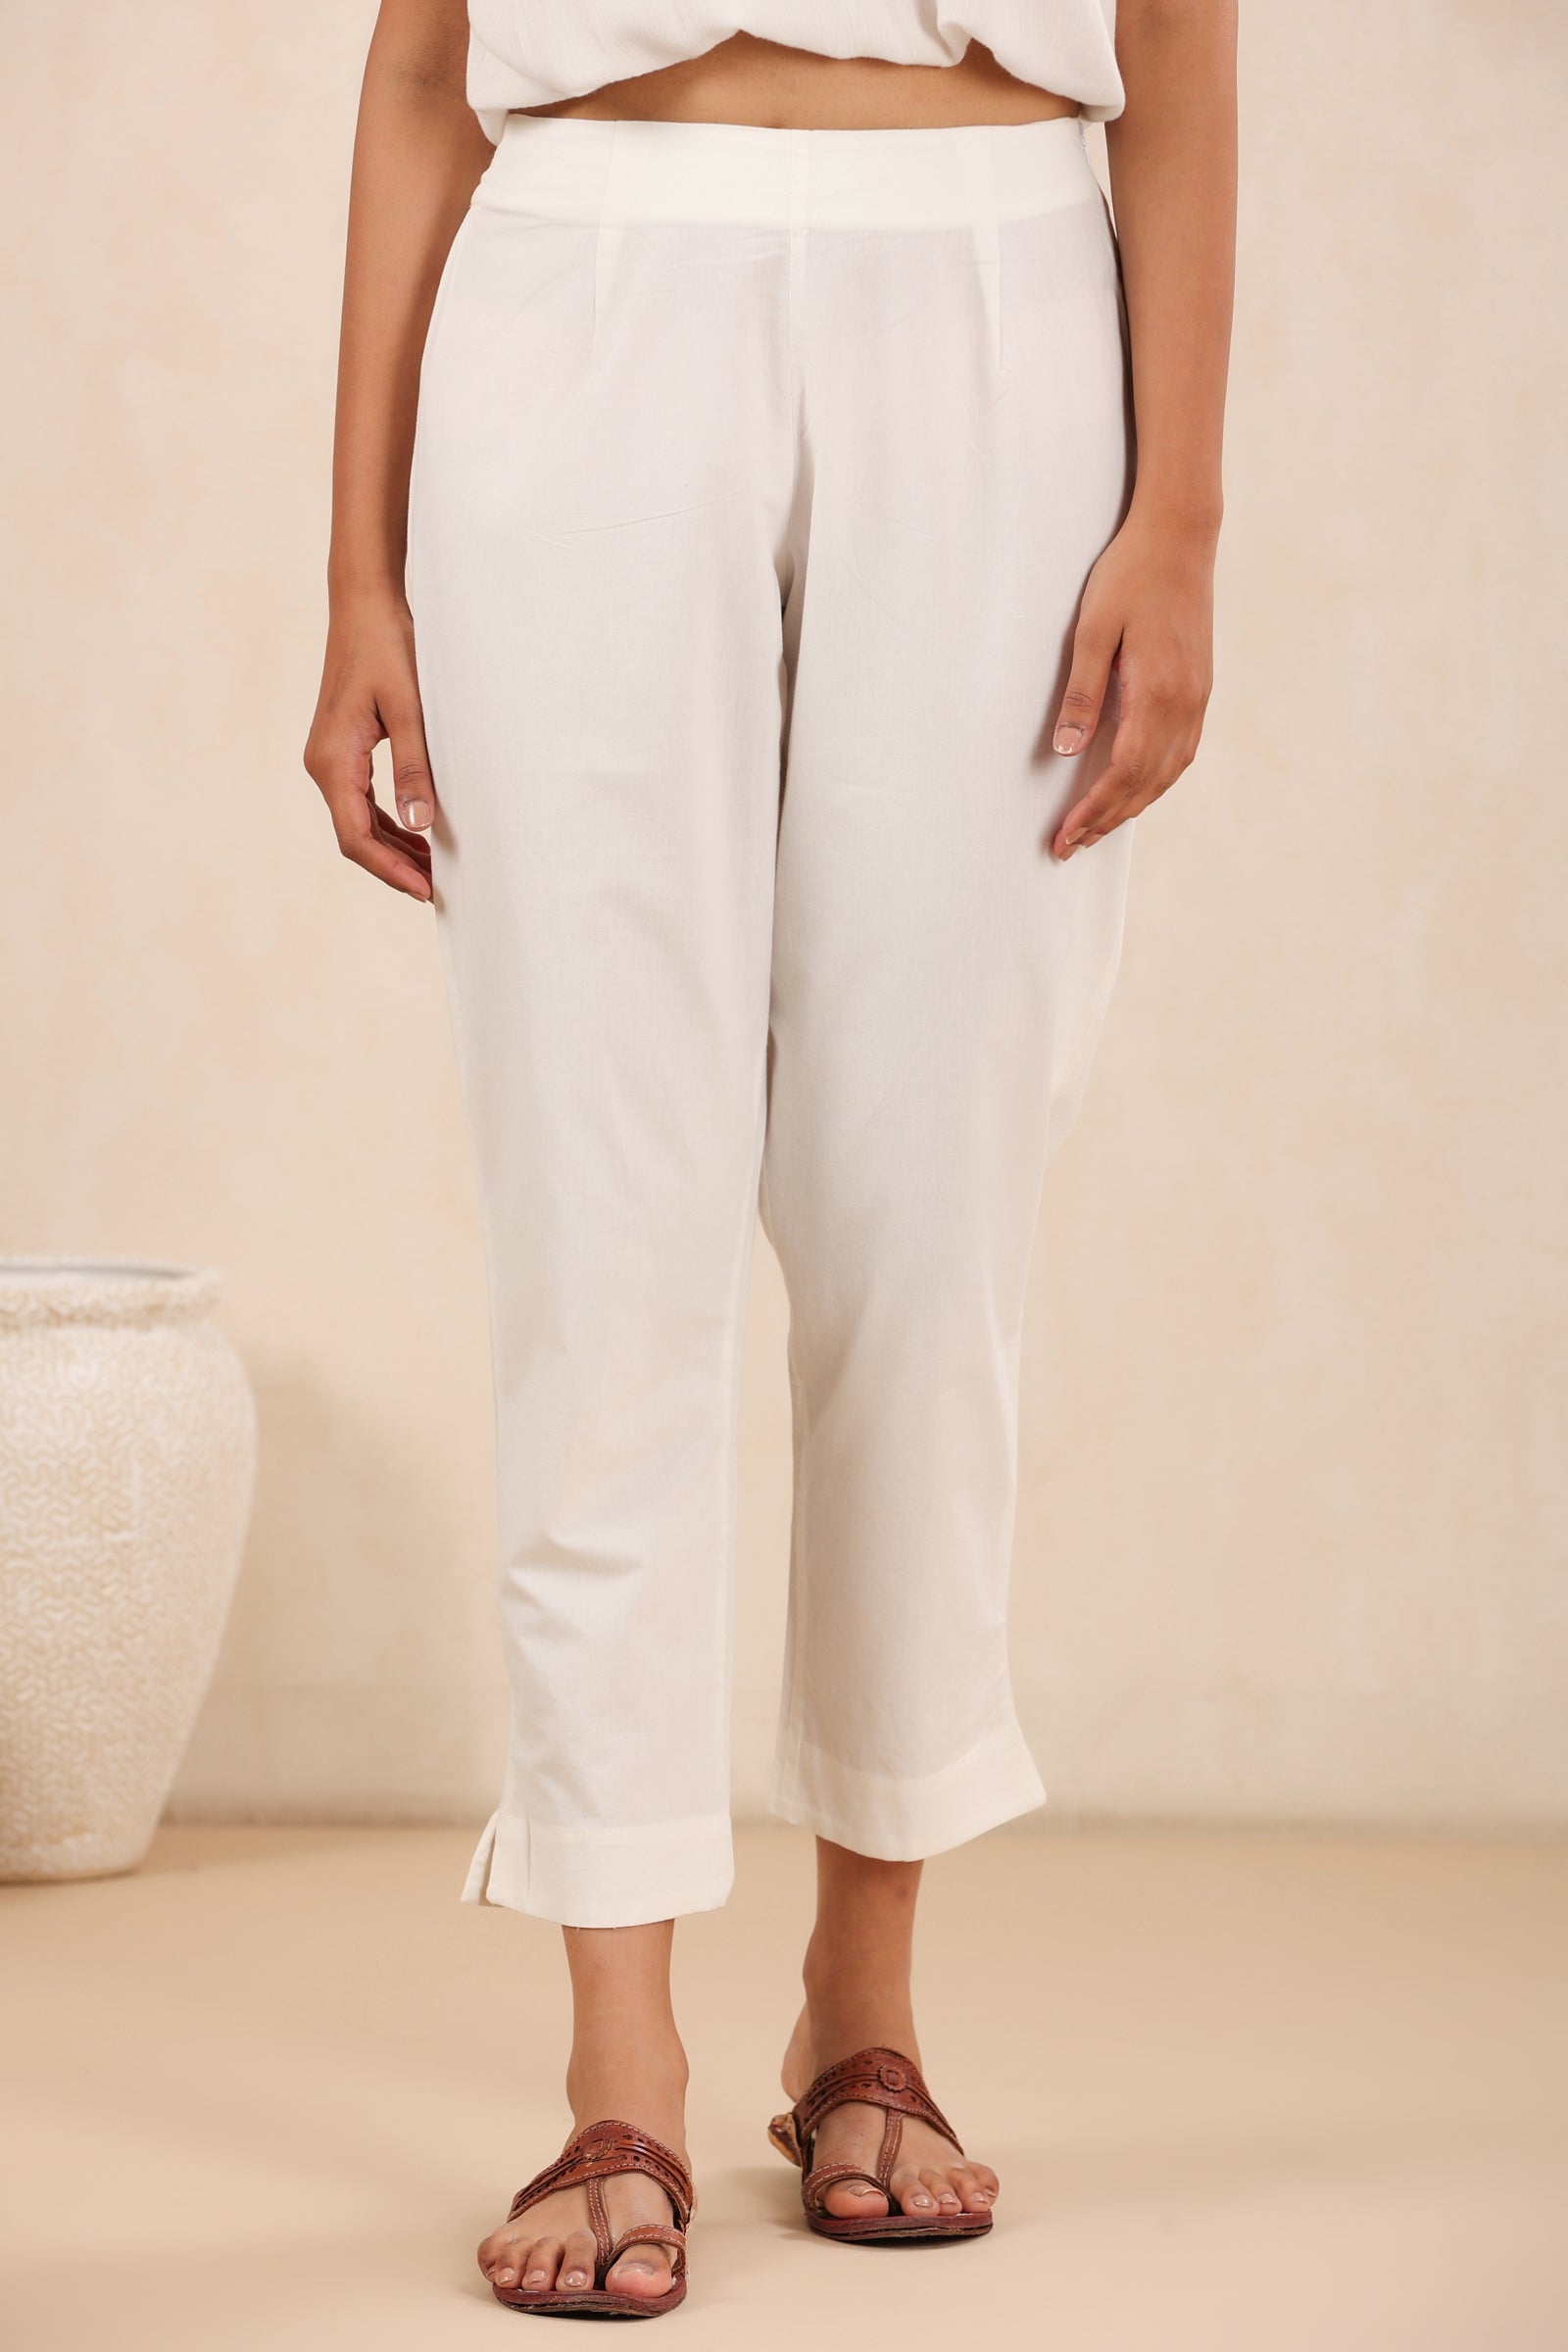 Mehrab Solid White Relaxed Fit Cotton Pants - shahenazindia